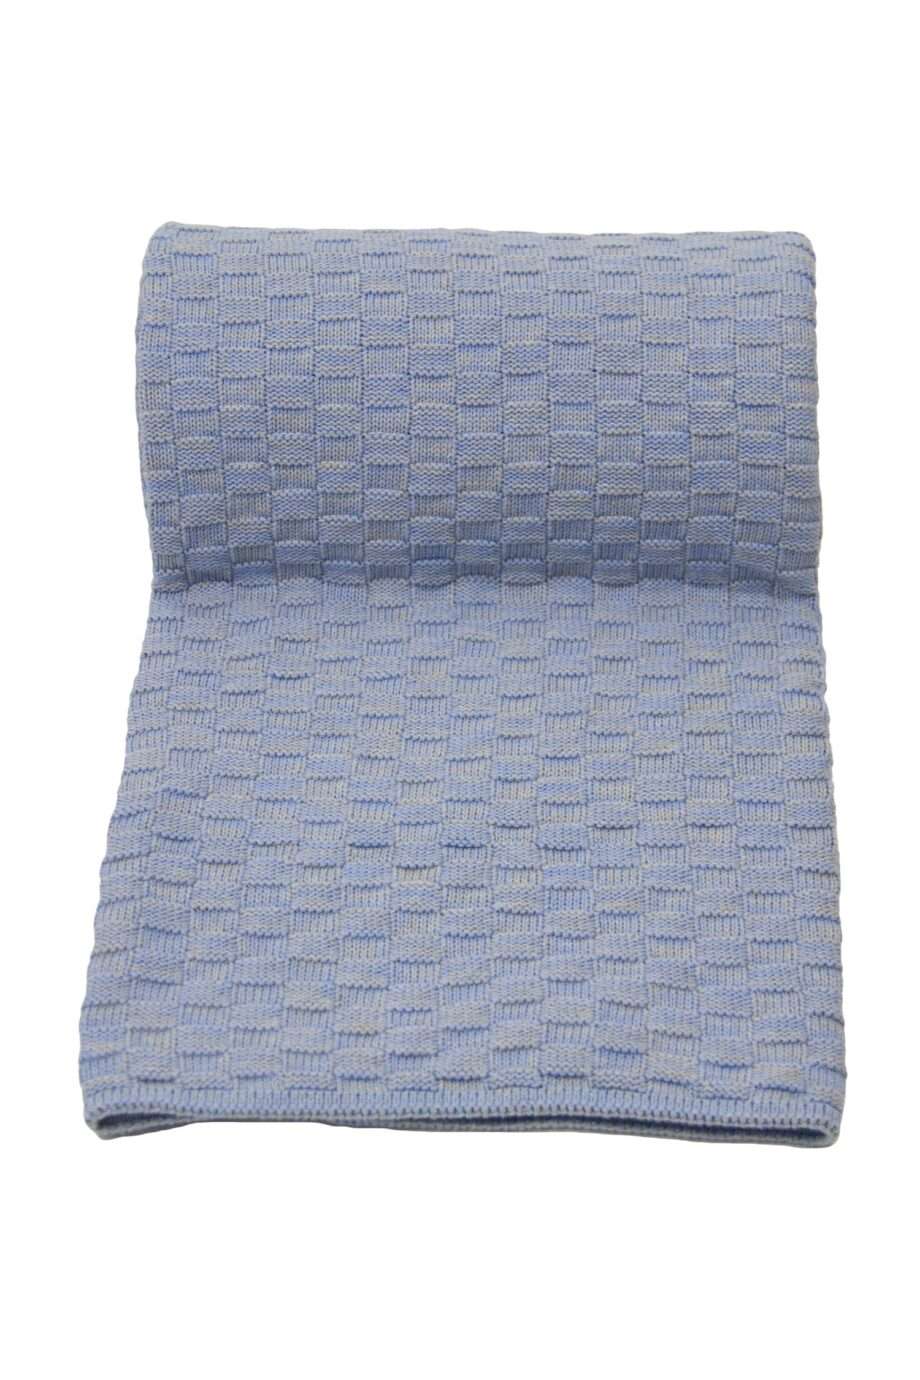 drops mêlée heavenly blue knitted cotton throw large